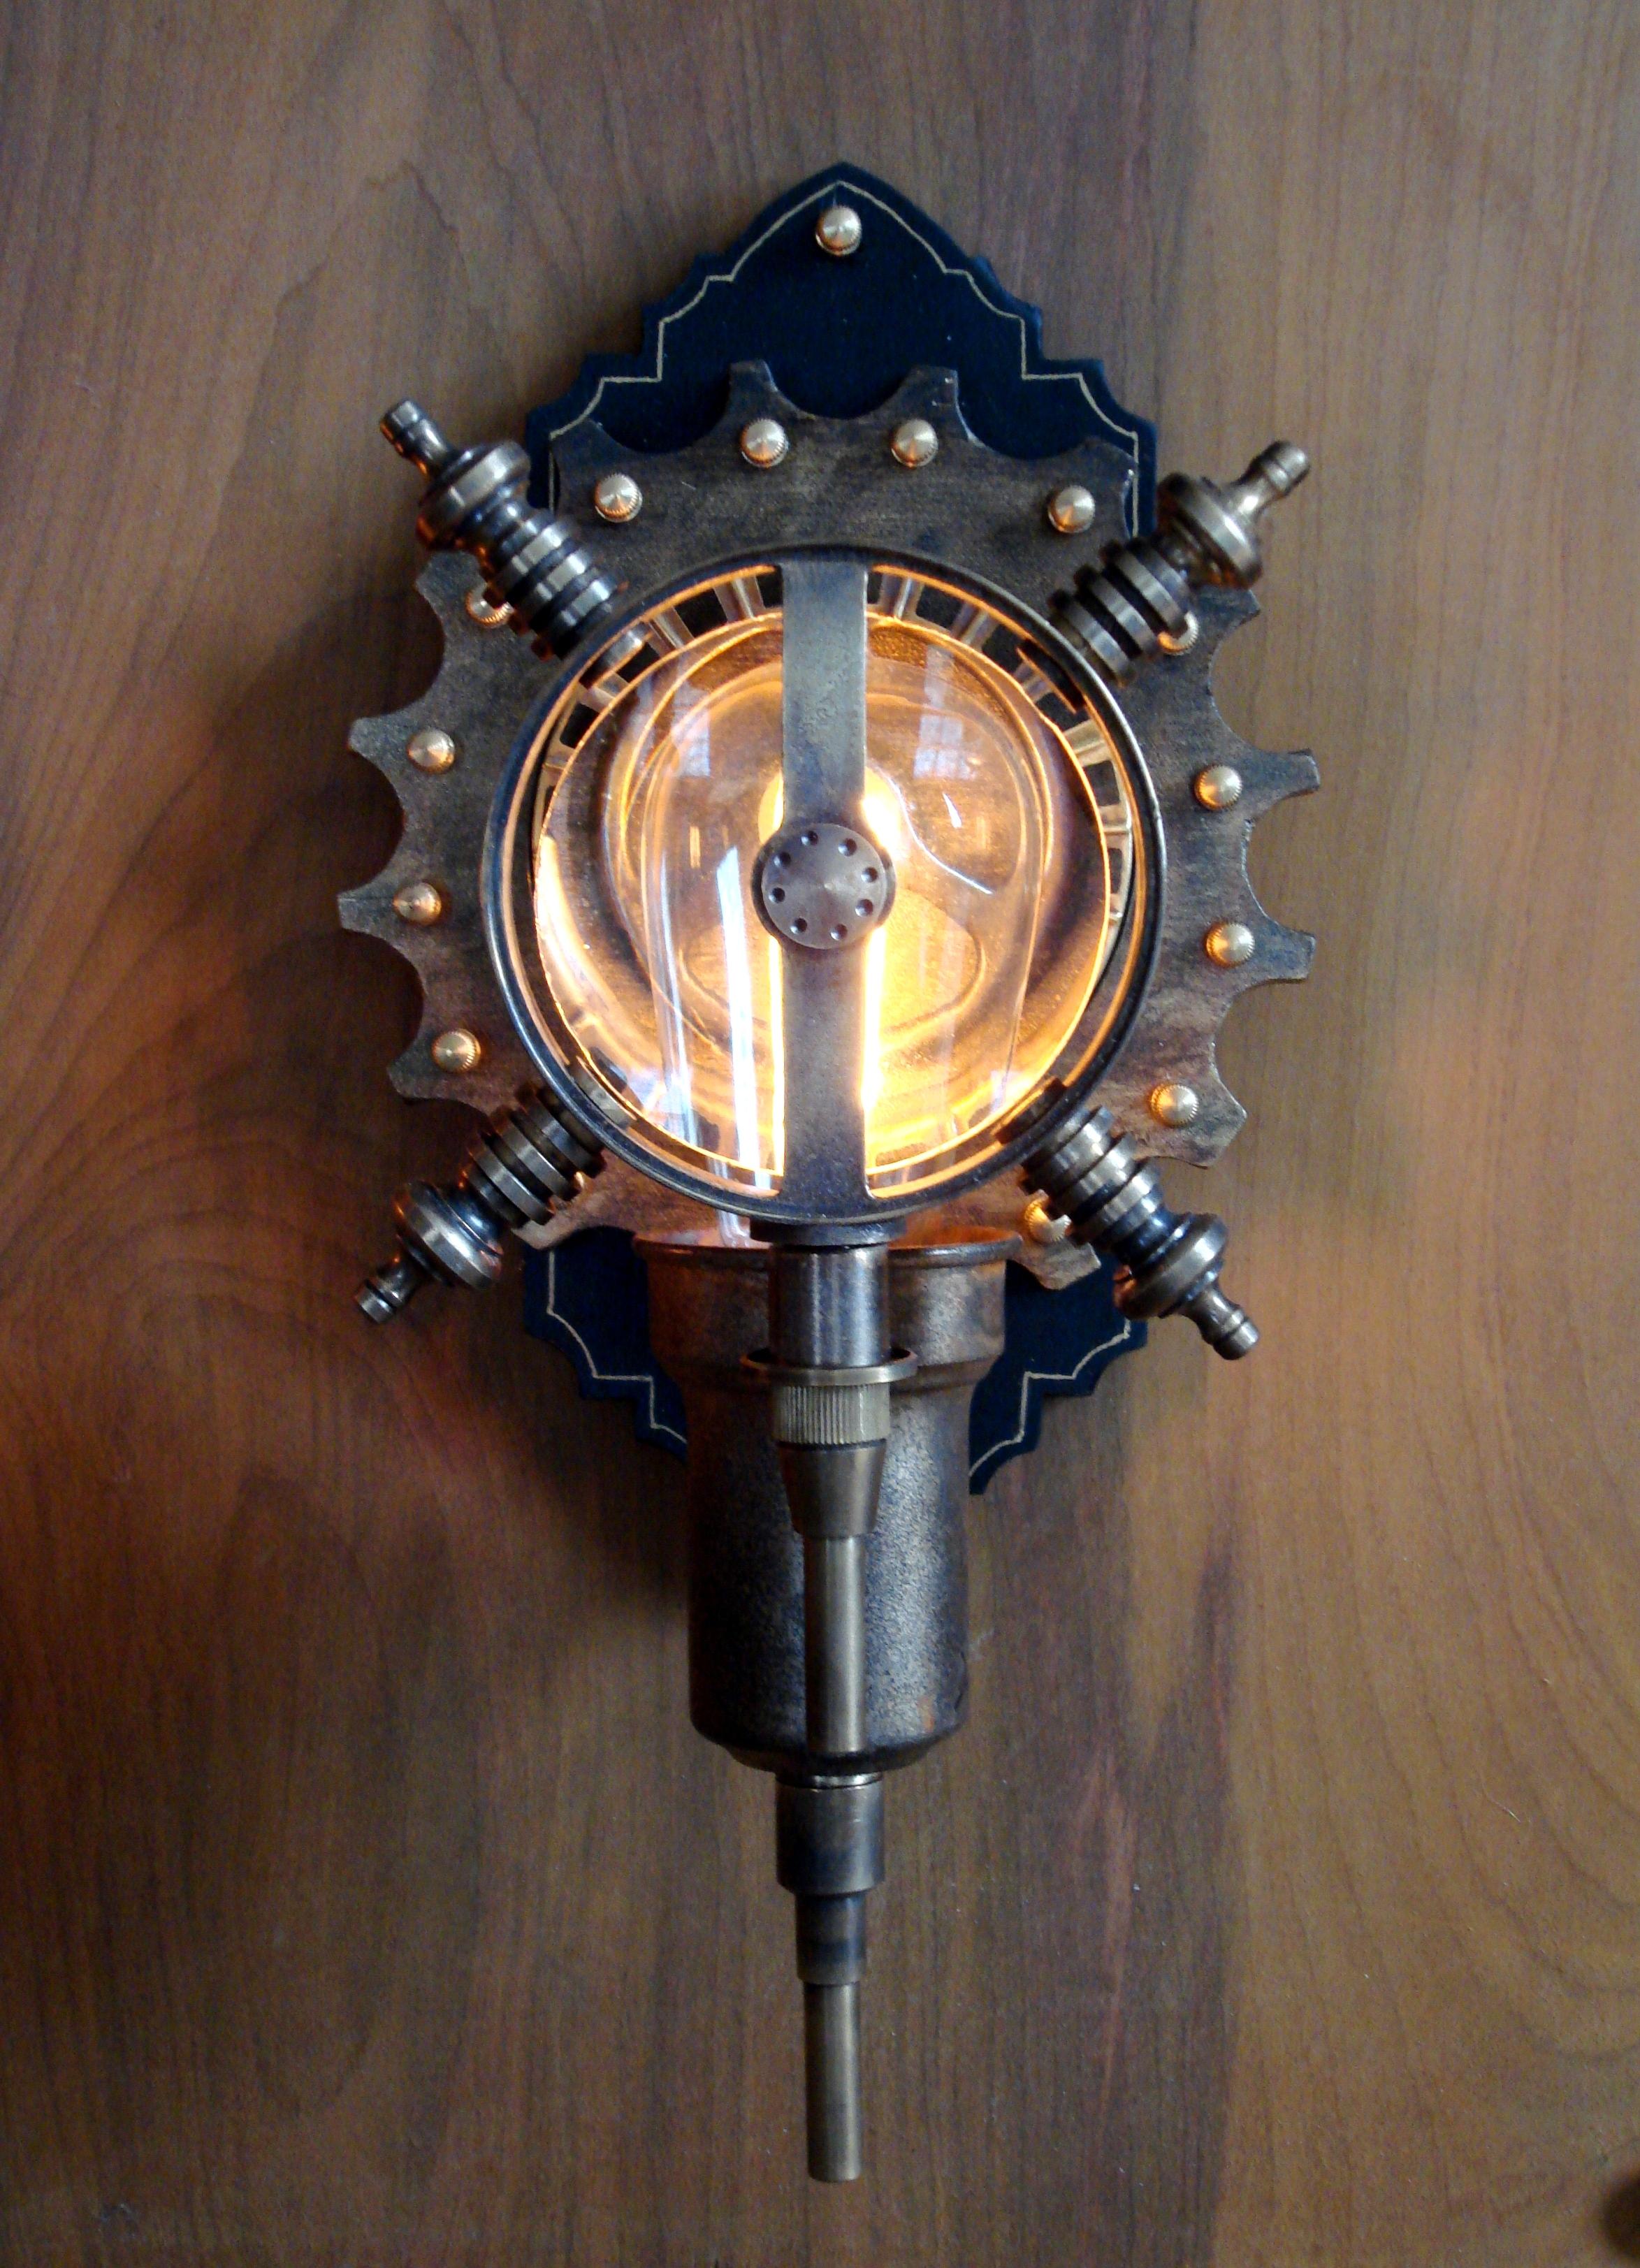 This Steampunk wall lamp was created as a 